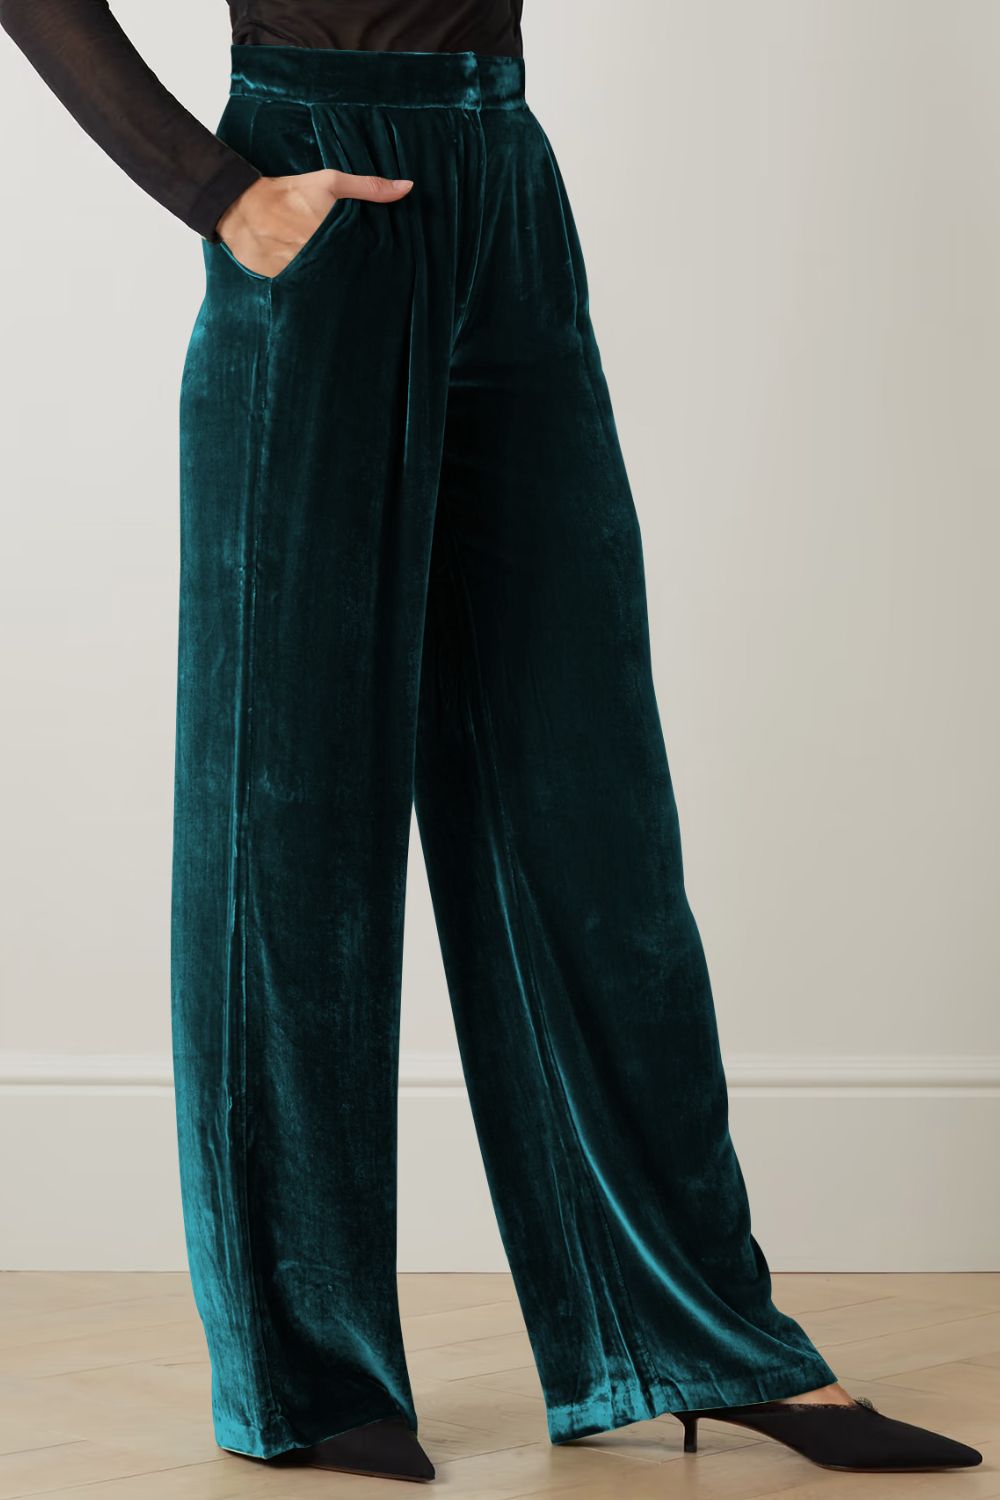 Loose Fit High Waist Long Pants with Pockets